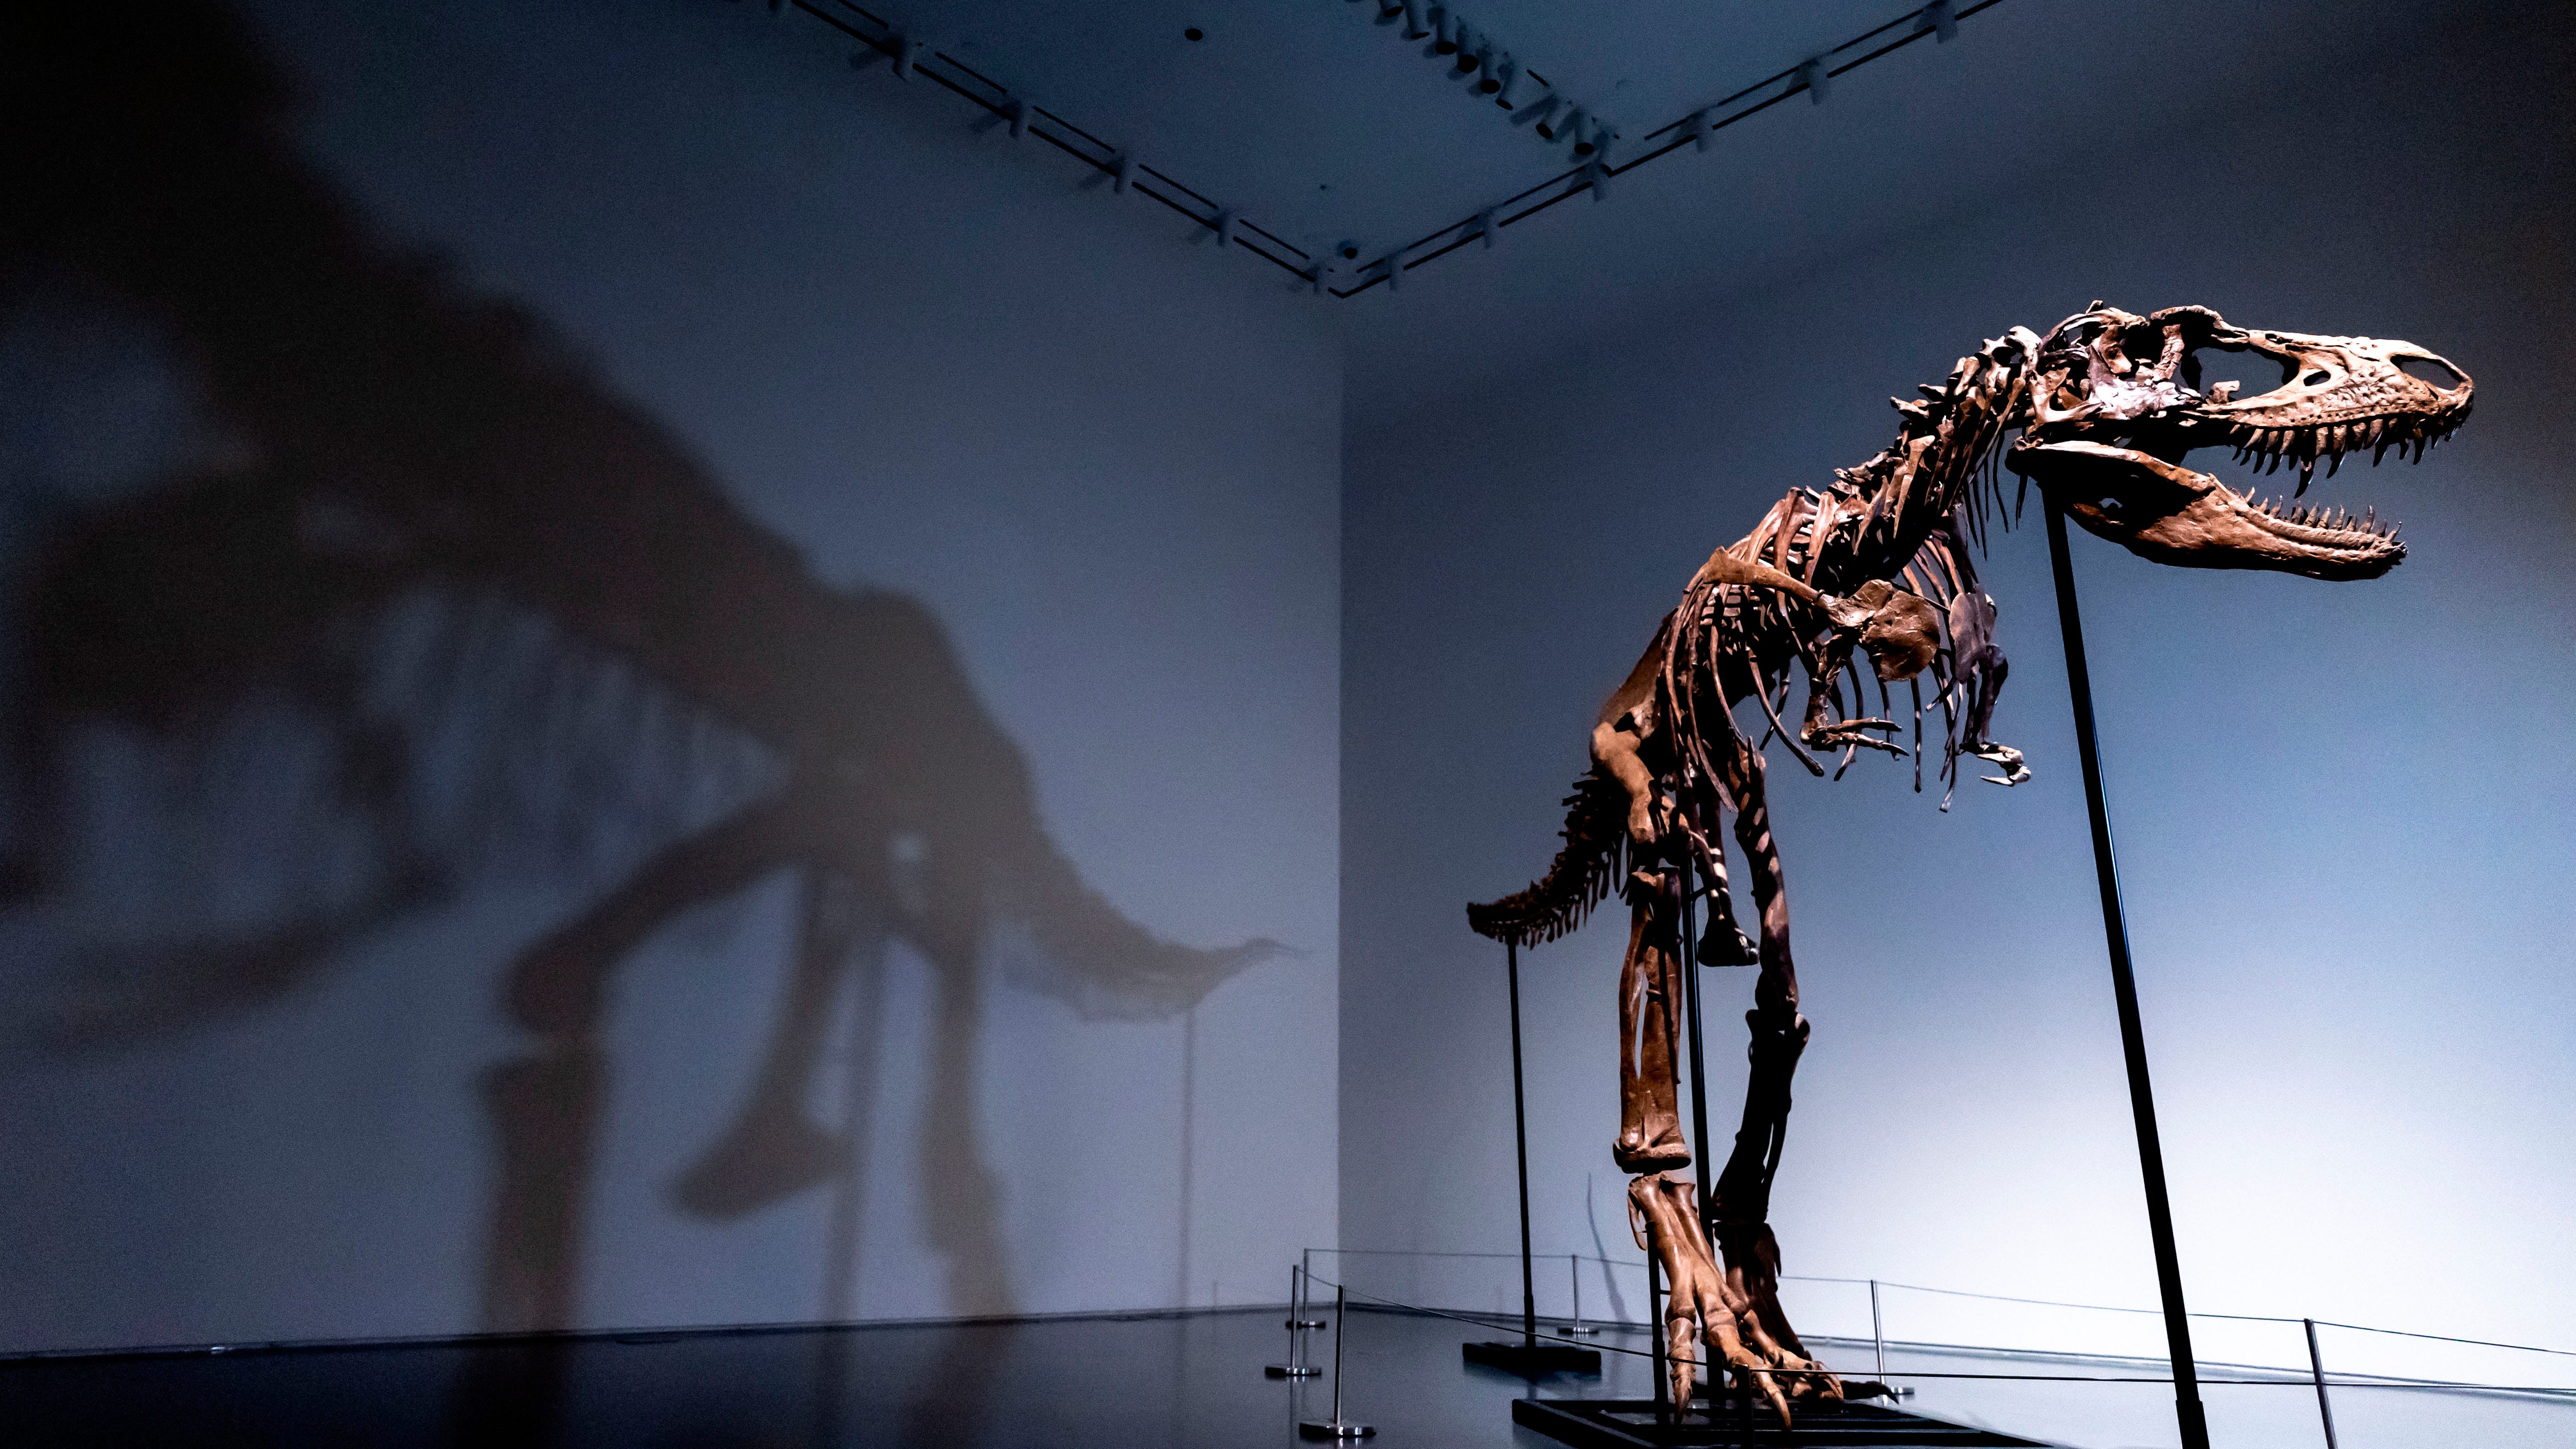 First-ever Gorgosaurus skeleton sells at auction for $6.1M to unknown buyer — scientists frustrated